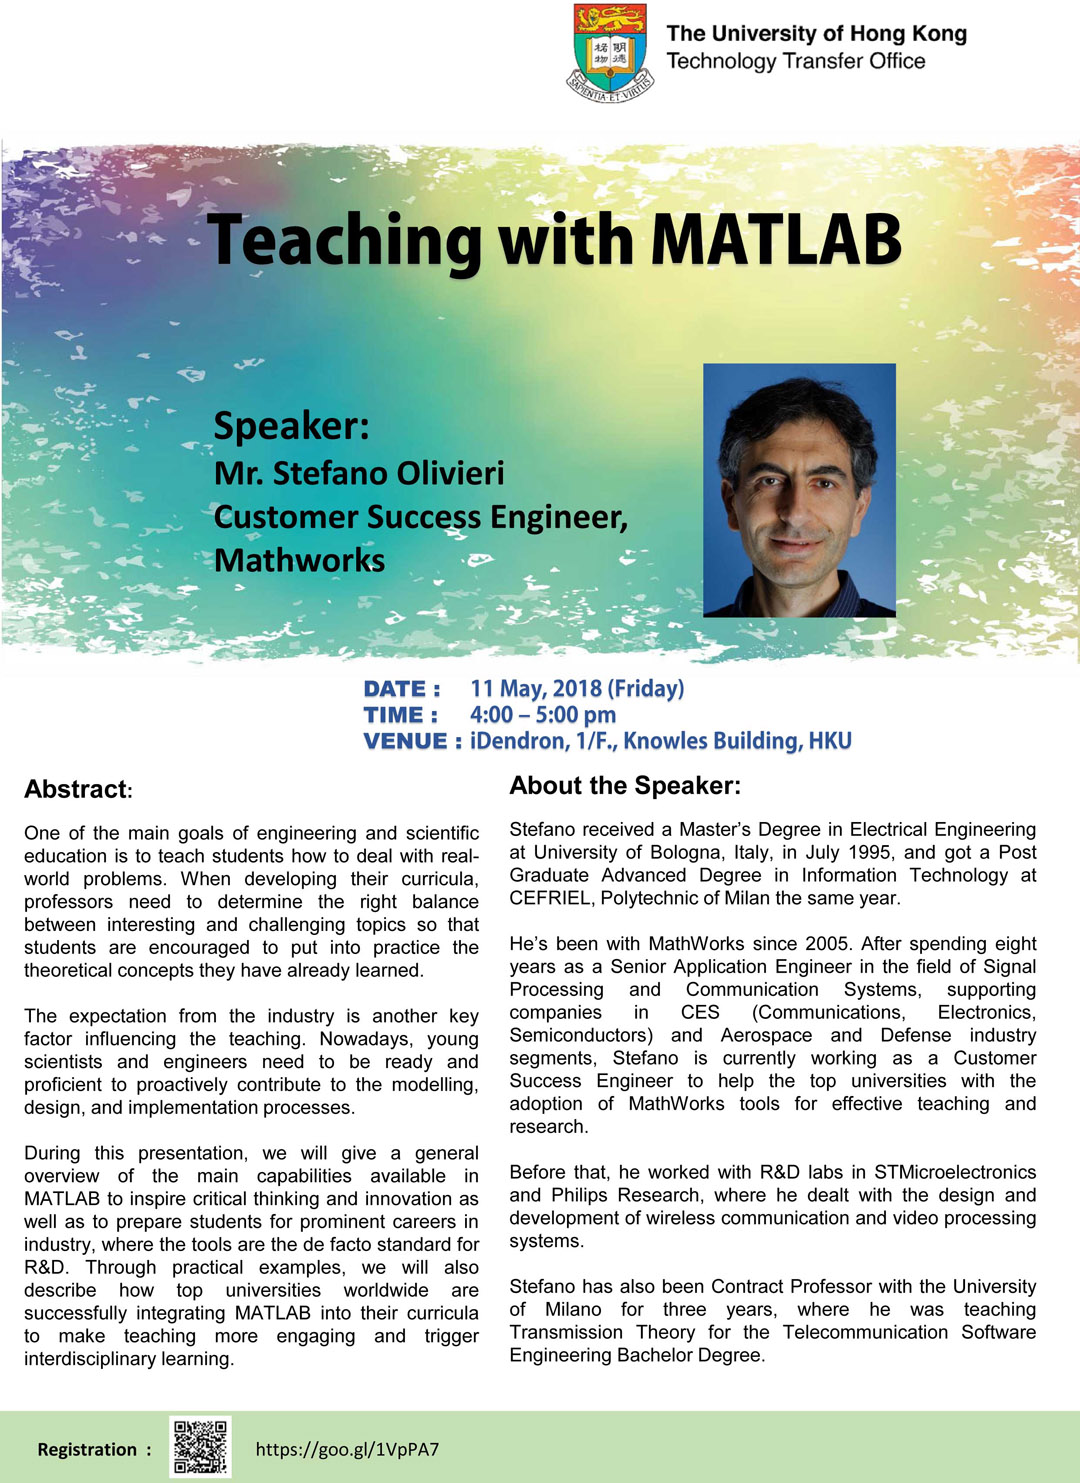 Teaching with MATLAB by Mr. Stefano Olivieri